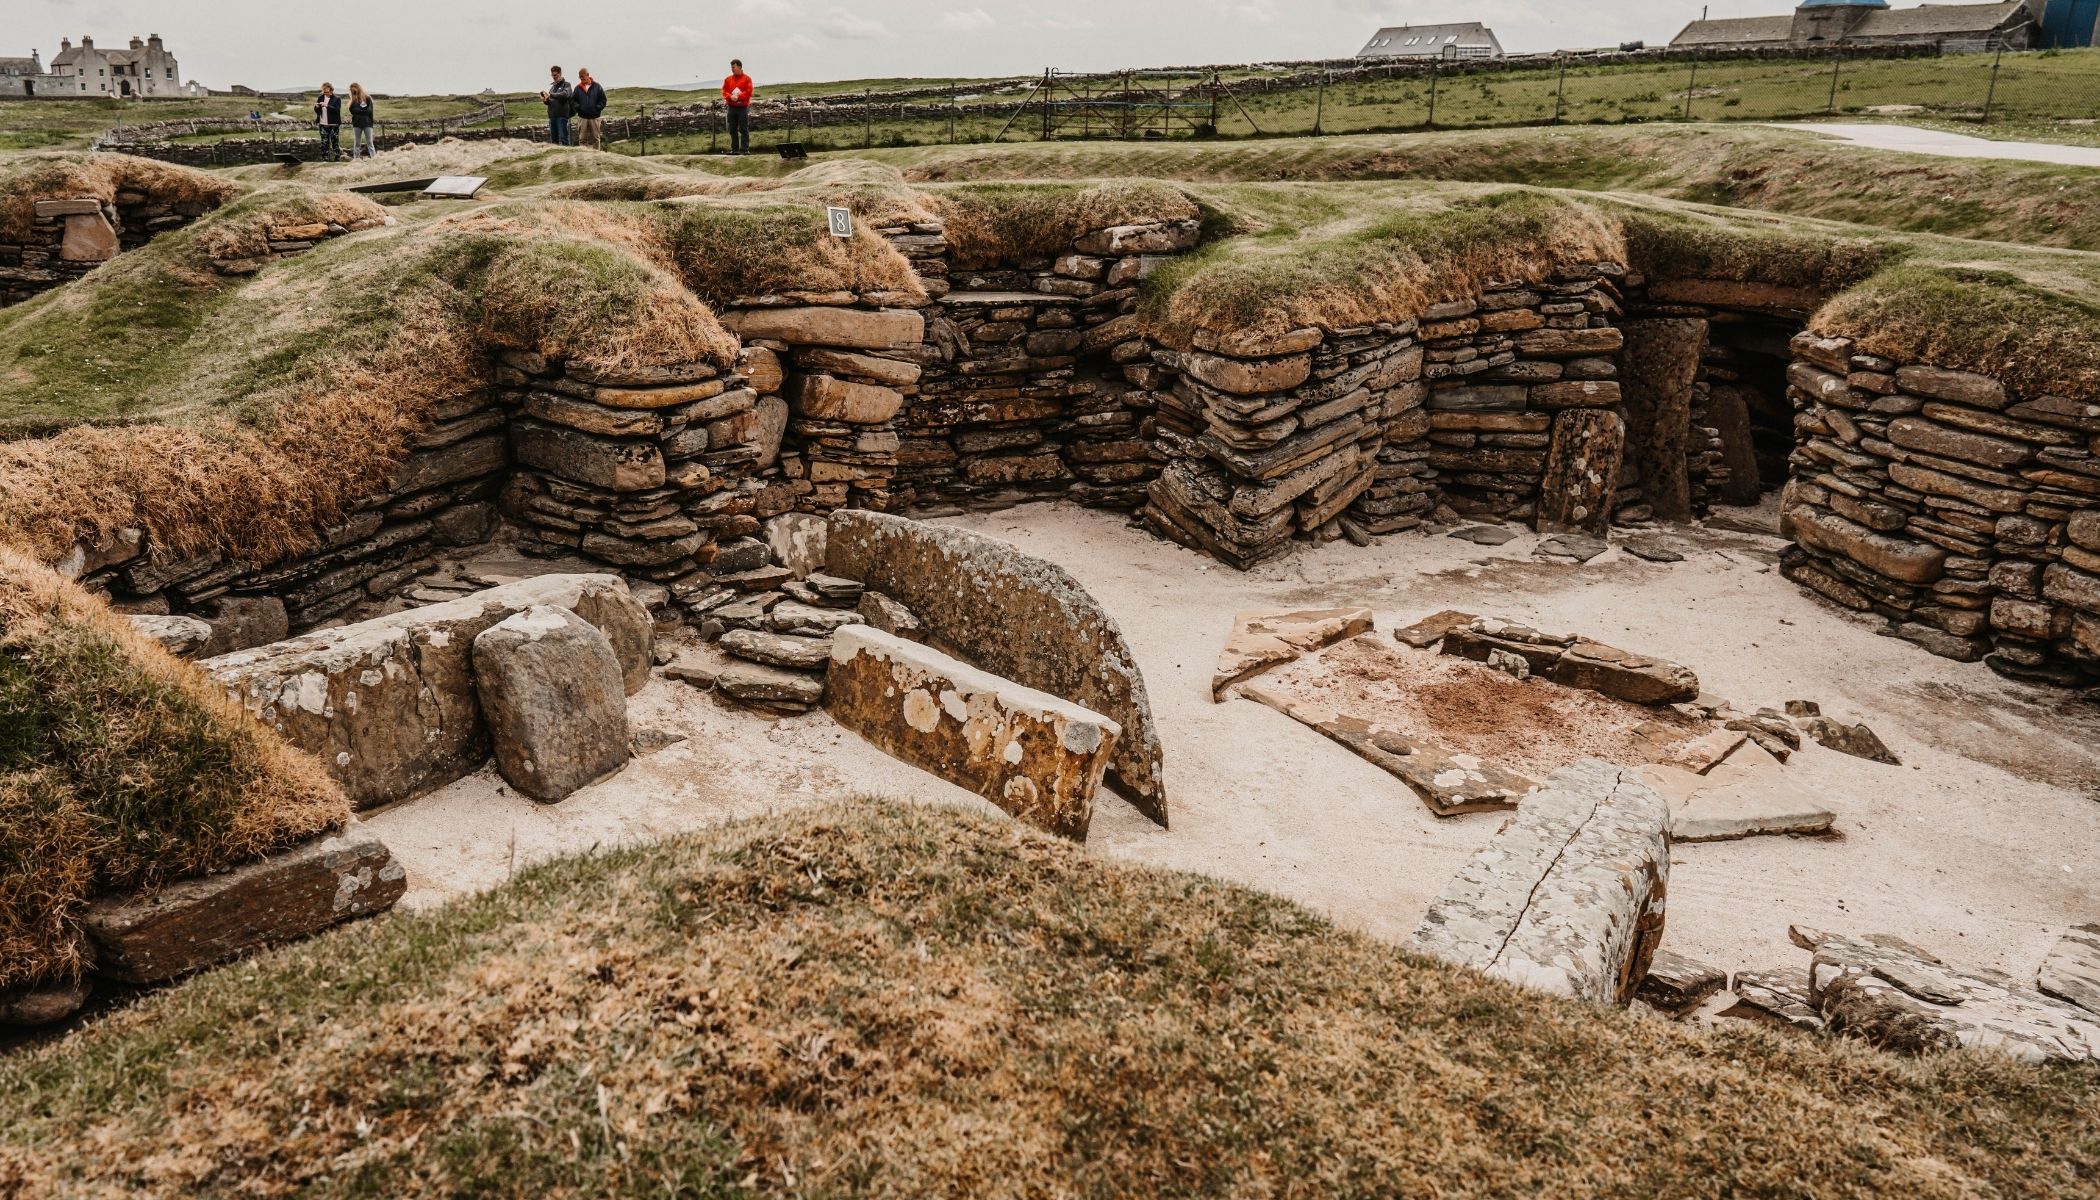 Neolithic Orkney